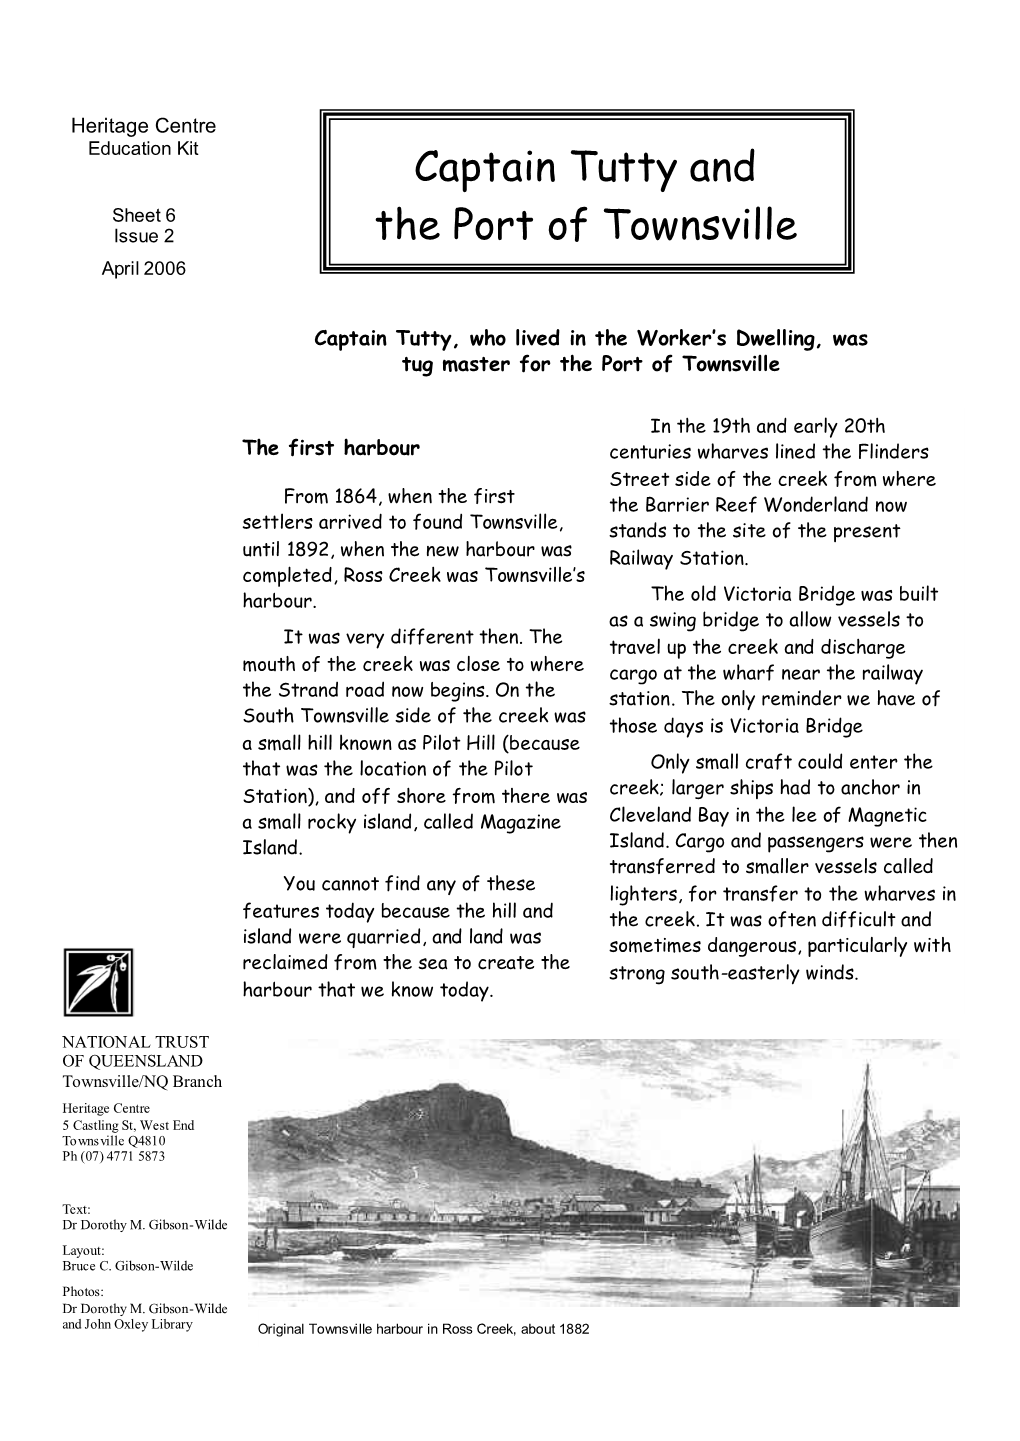 CAPTAIN TUTTY and the PORT of TOWNSVILLE Page 2 of 4